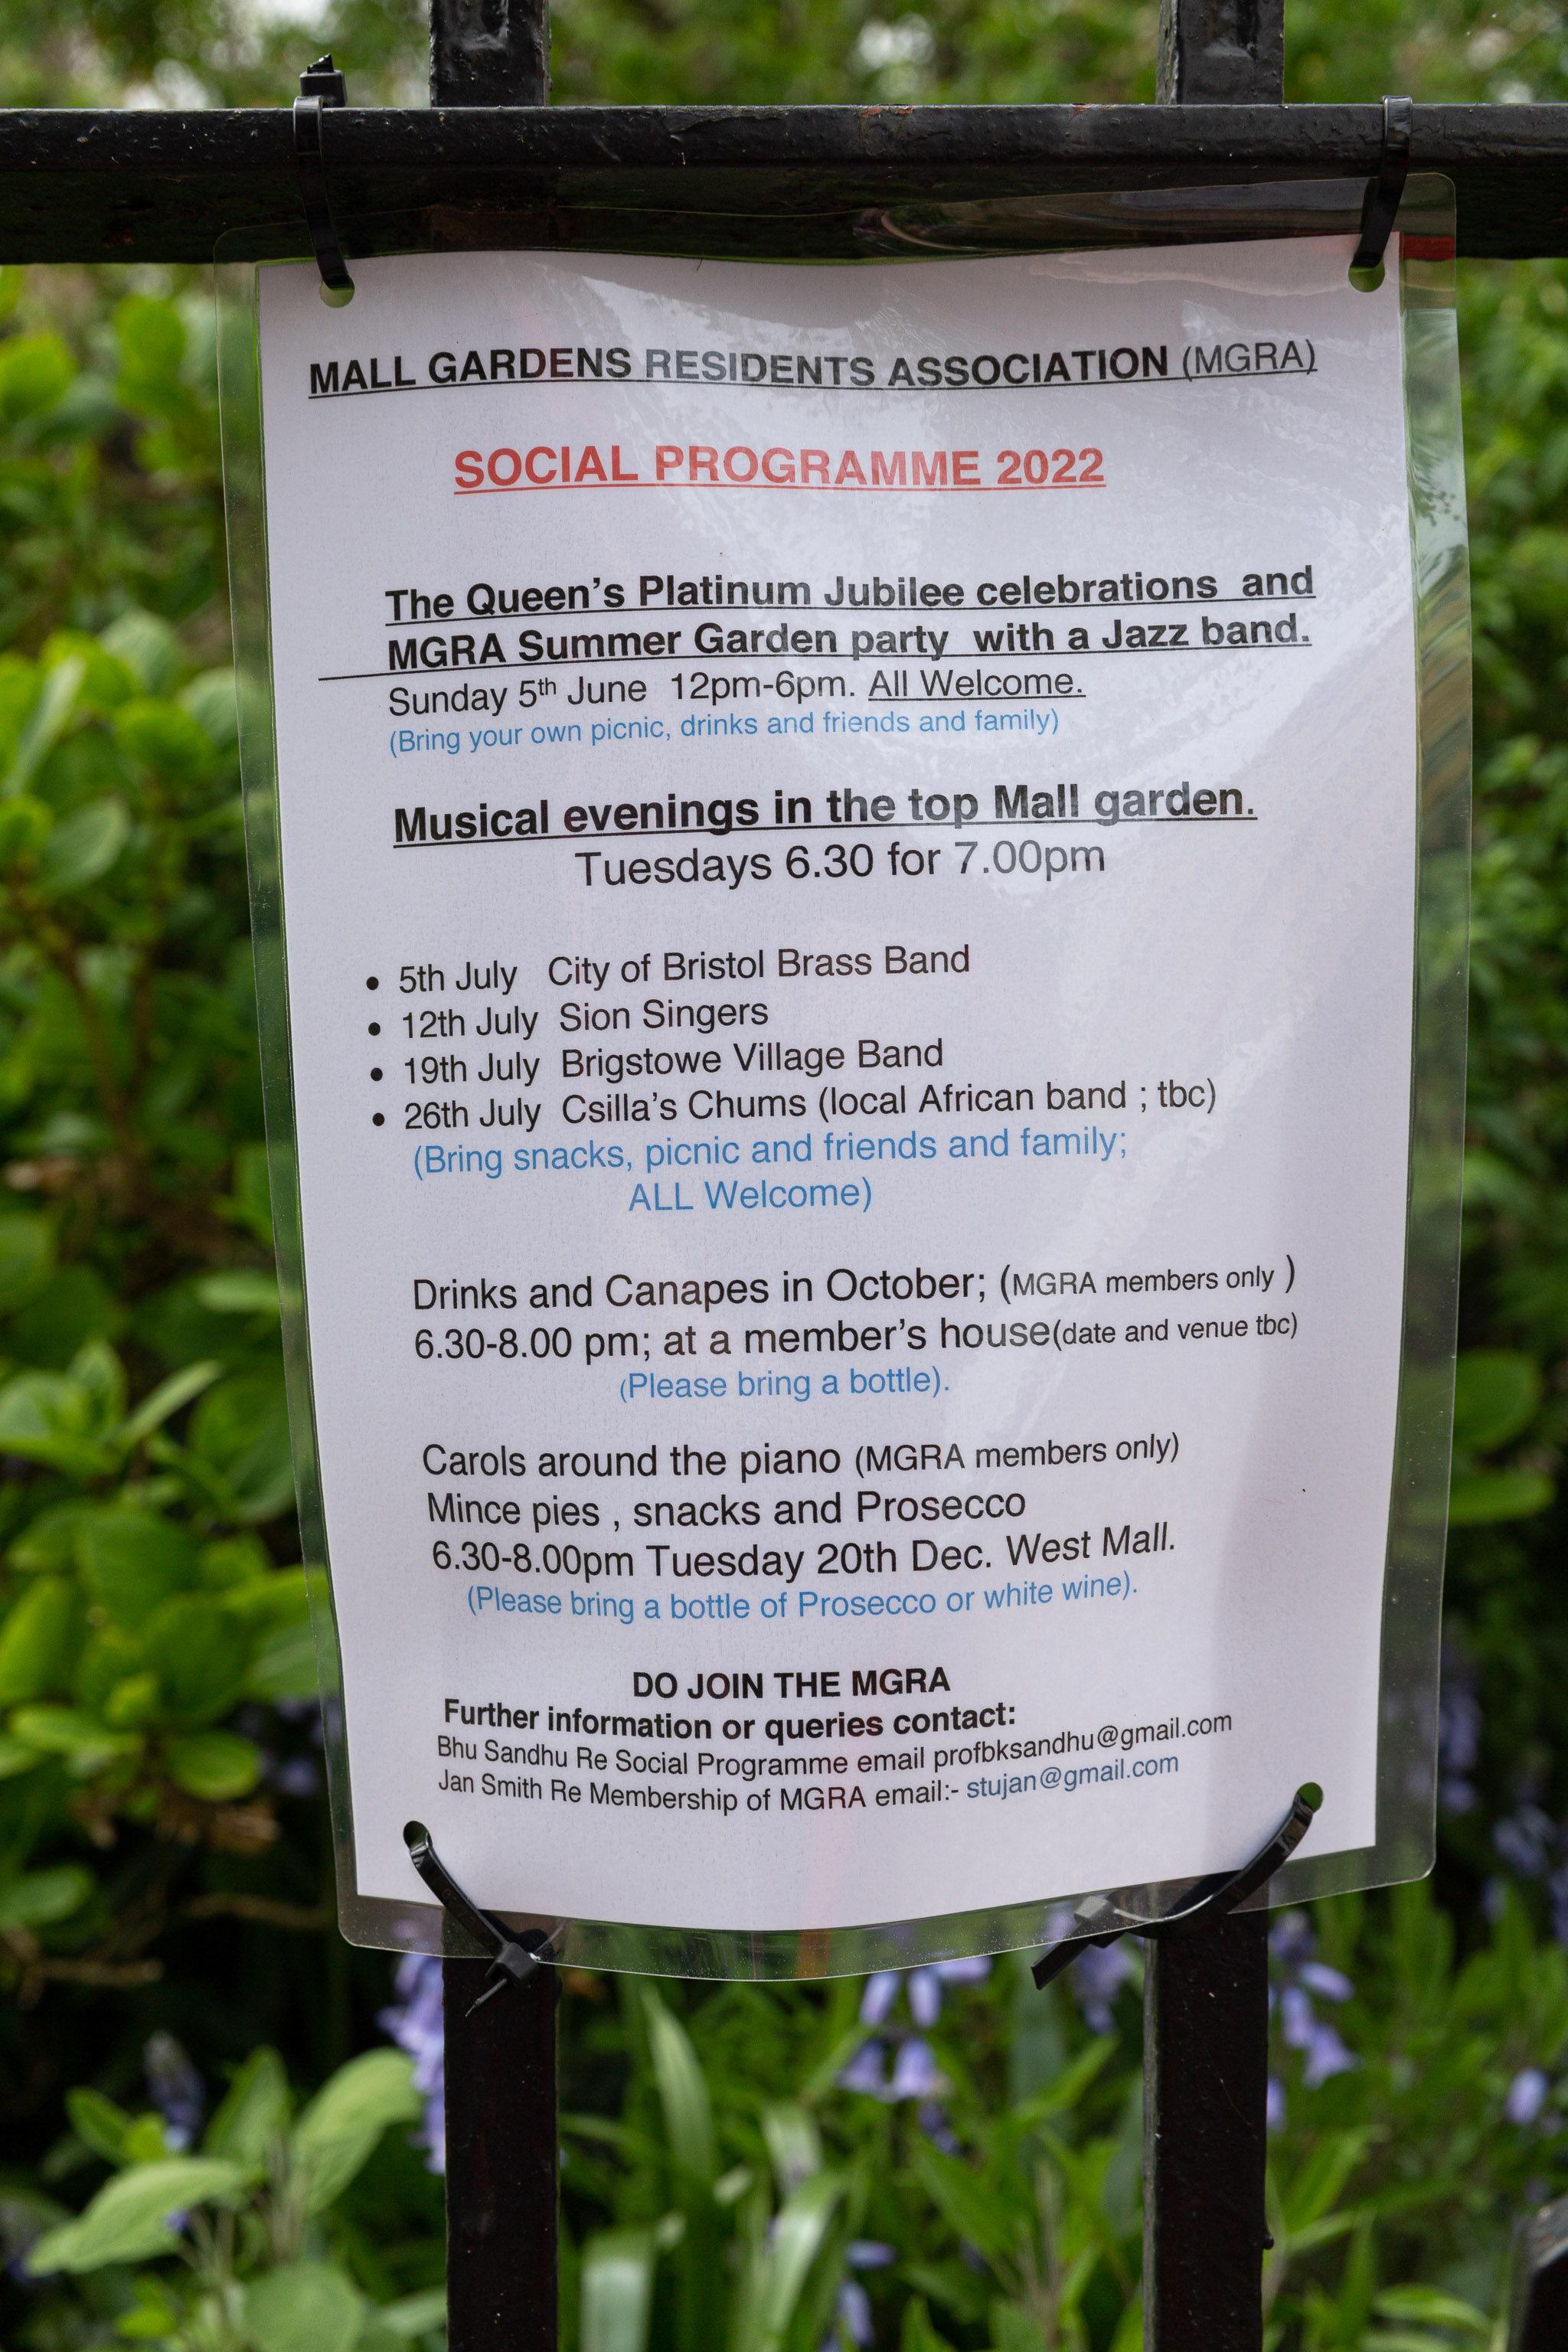 Social Programme
With a special Platinum Jubilee celebration on offer, too. I imagine The Mall Gardens will do that rather well.

The "Brigstowe Village Band" is a...